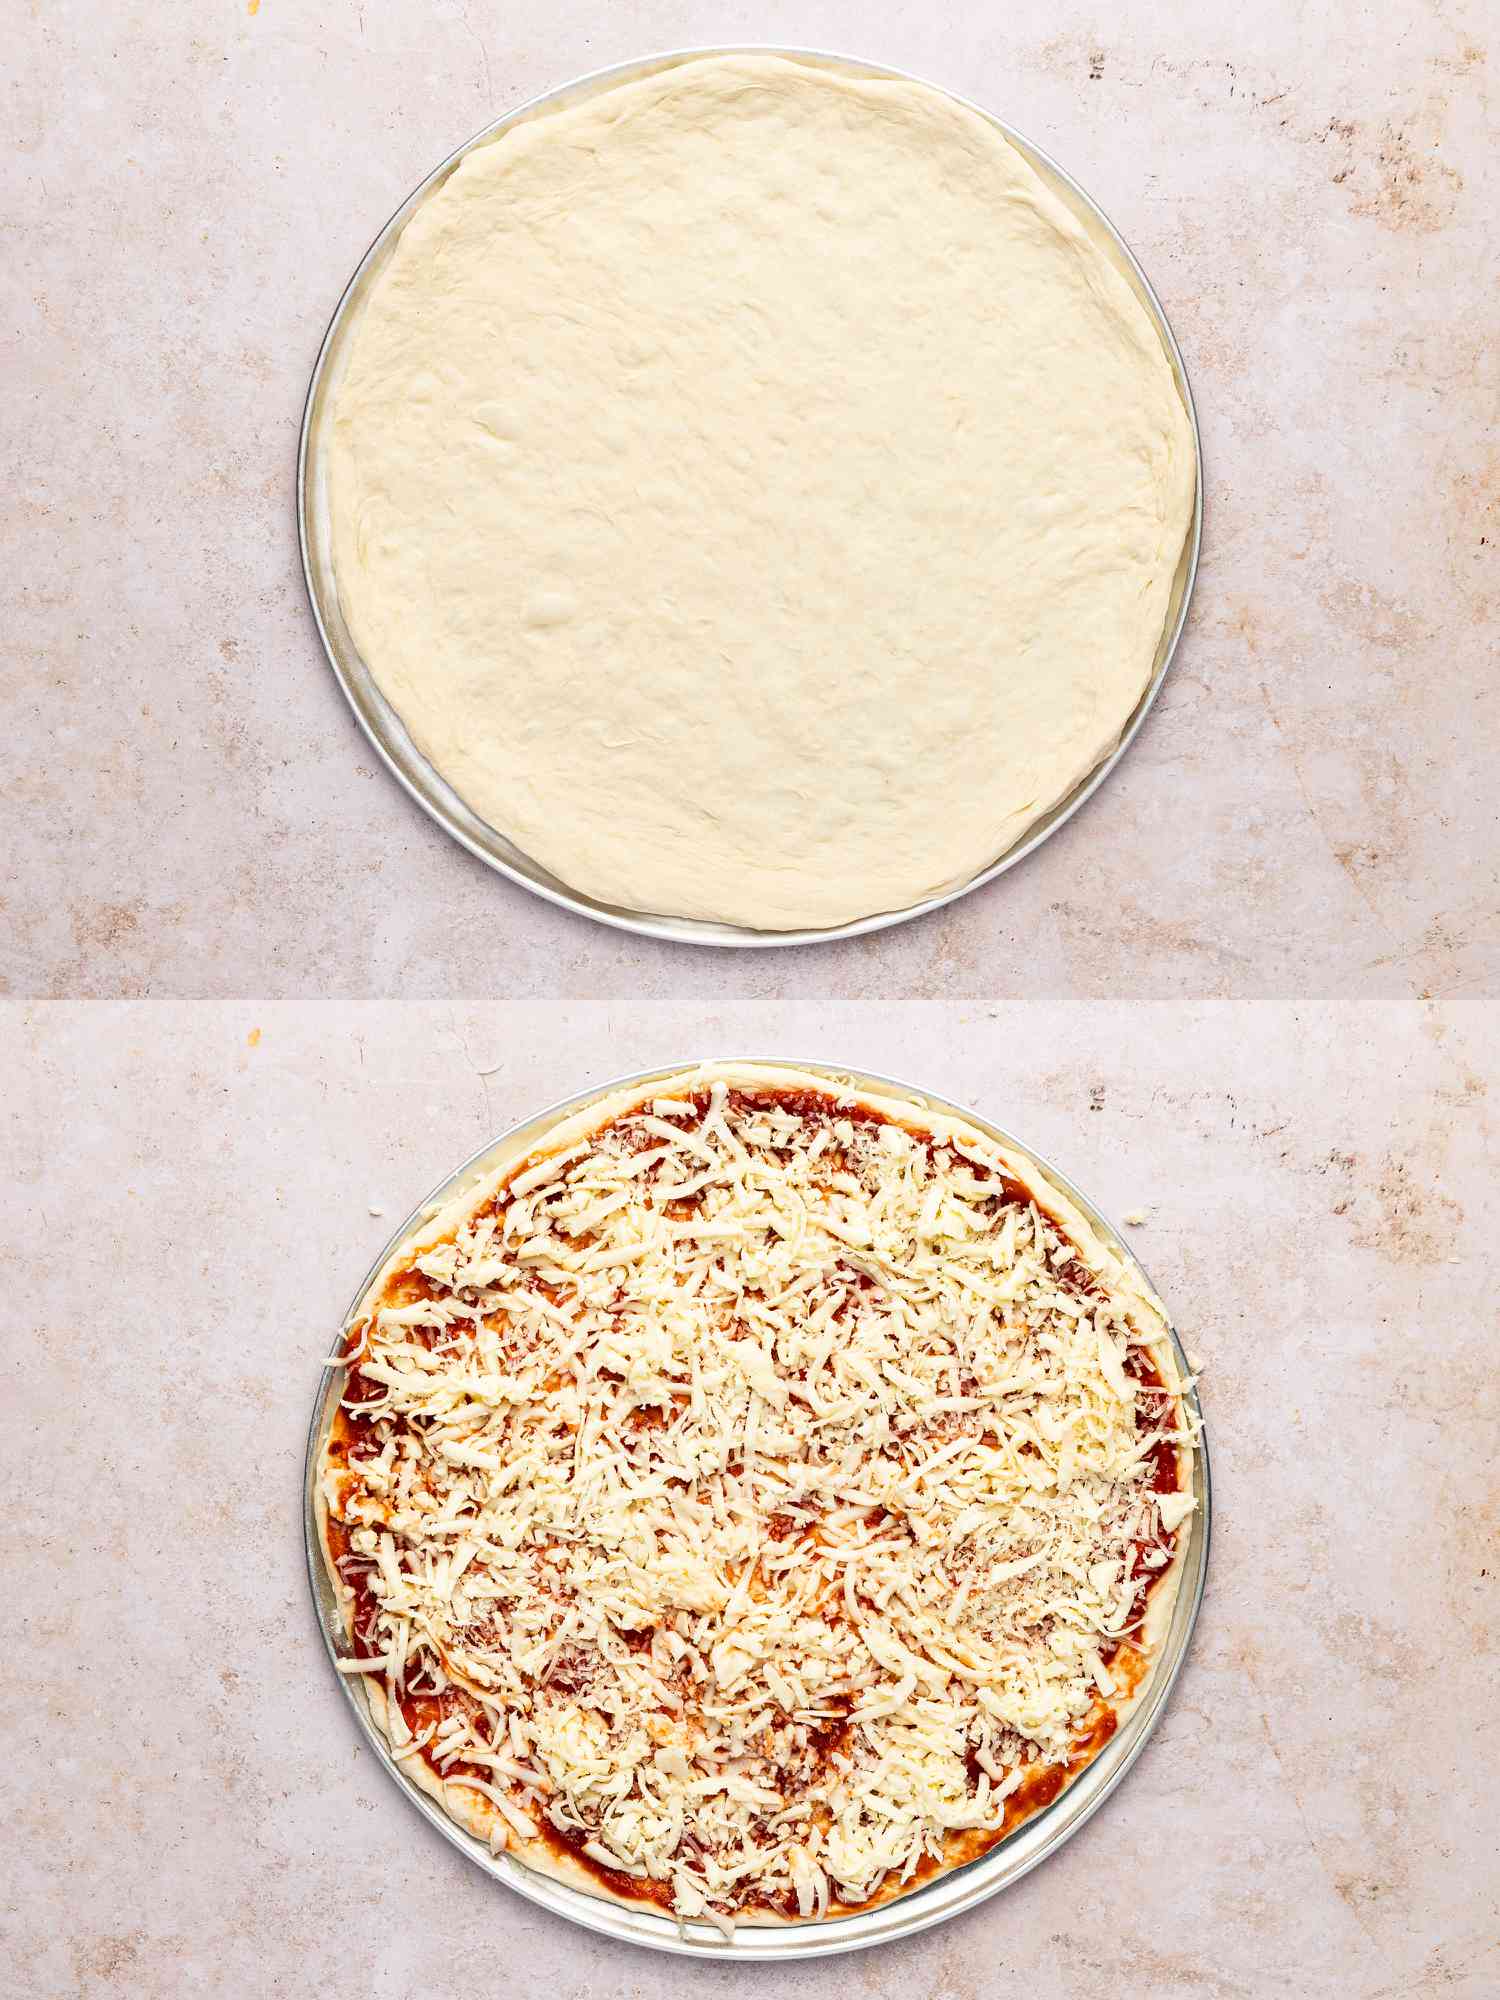 Pizza dough topped with parmesan cheese, sauce, and shredded cheese